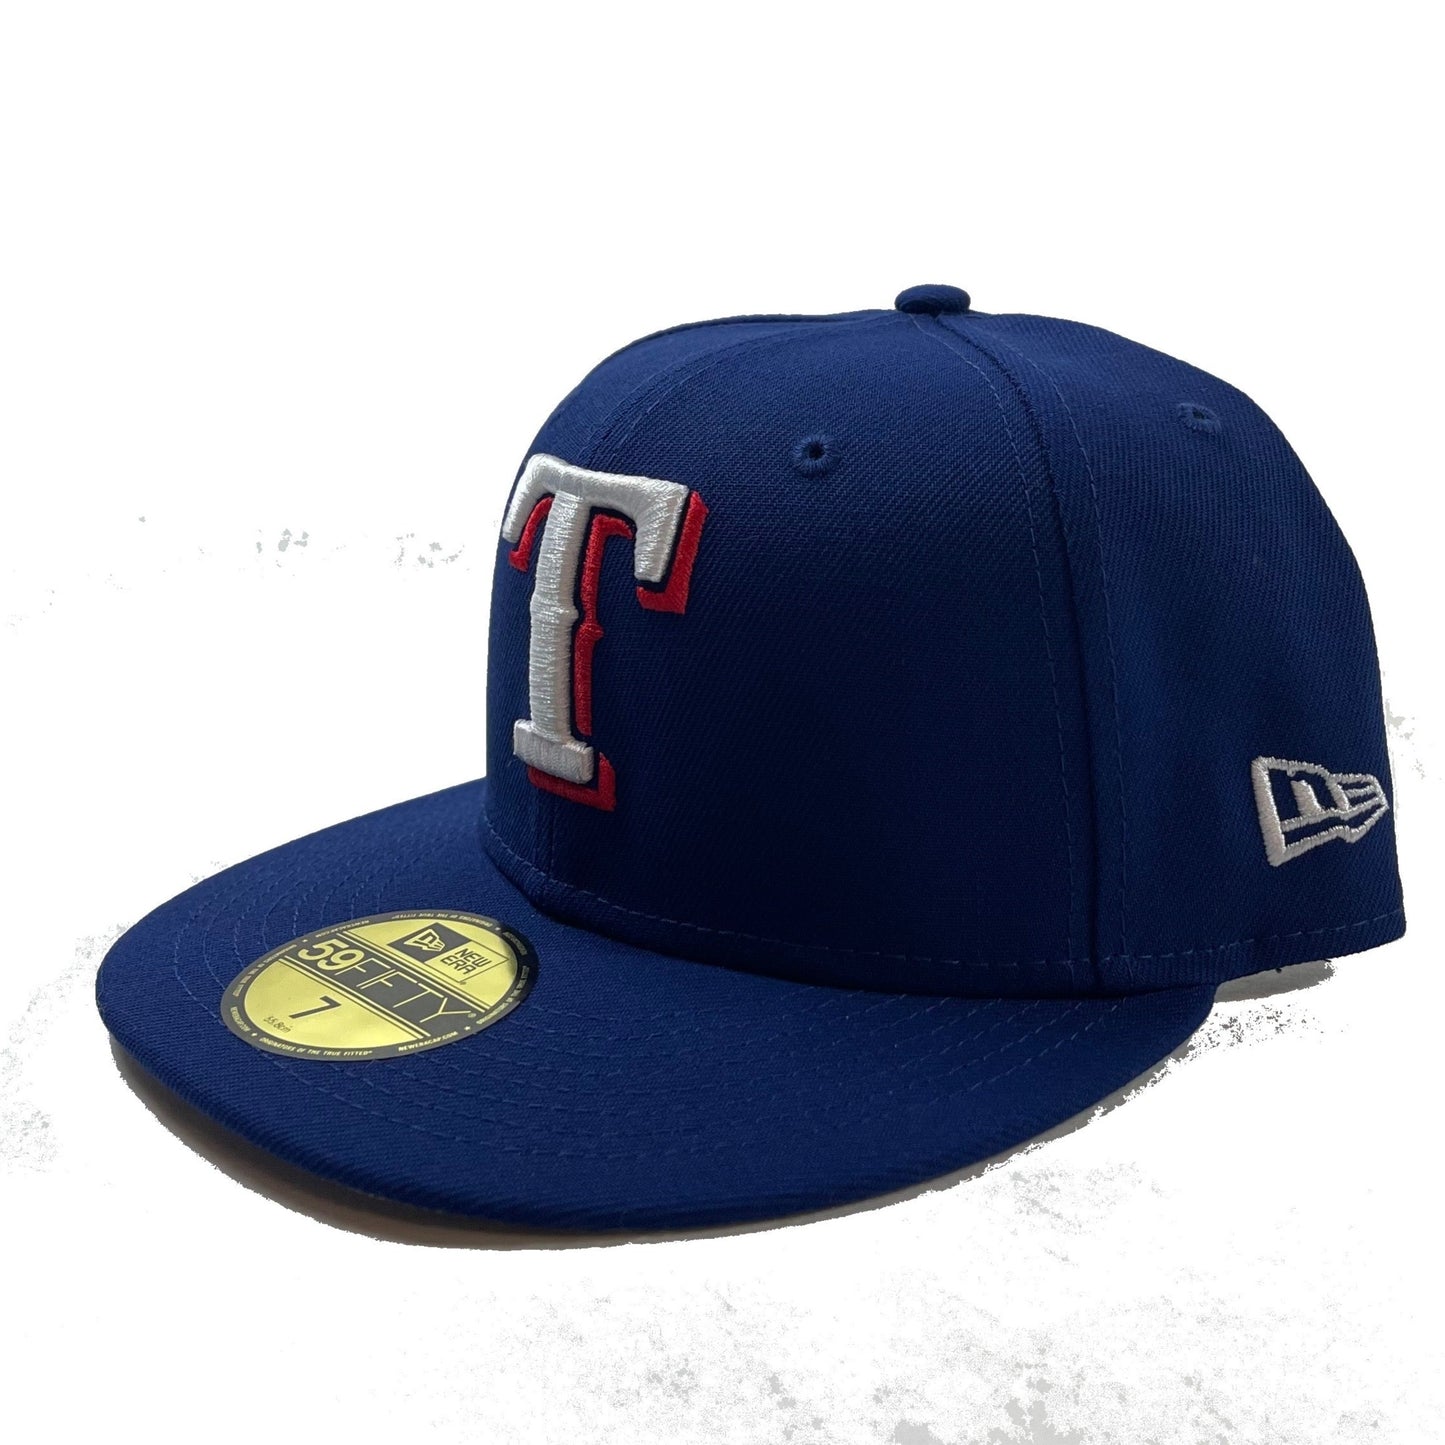 Texas Rangers (Blue) Fitted